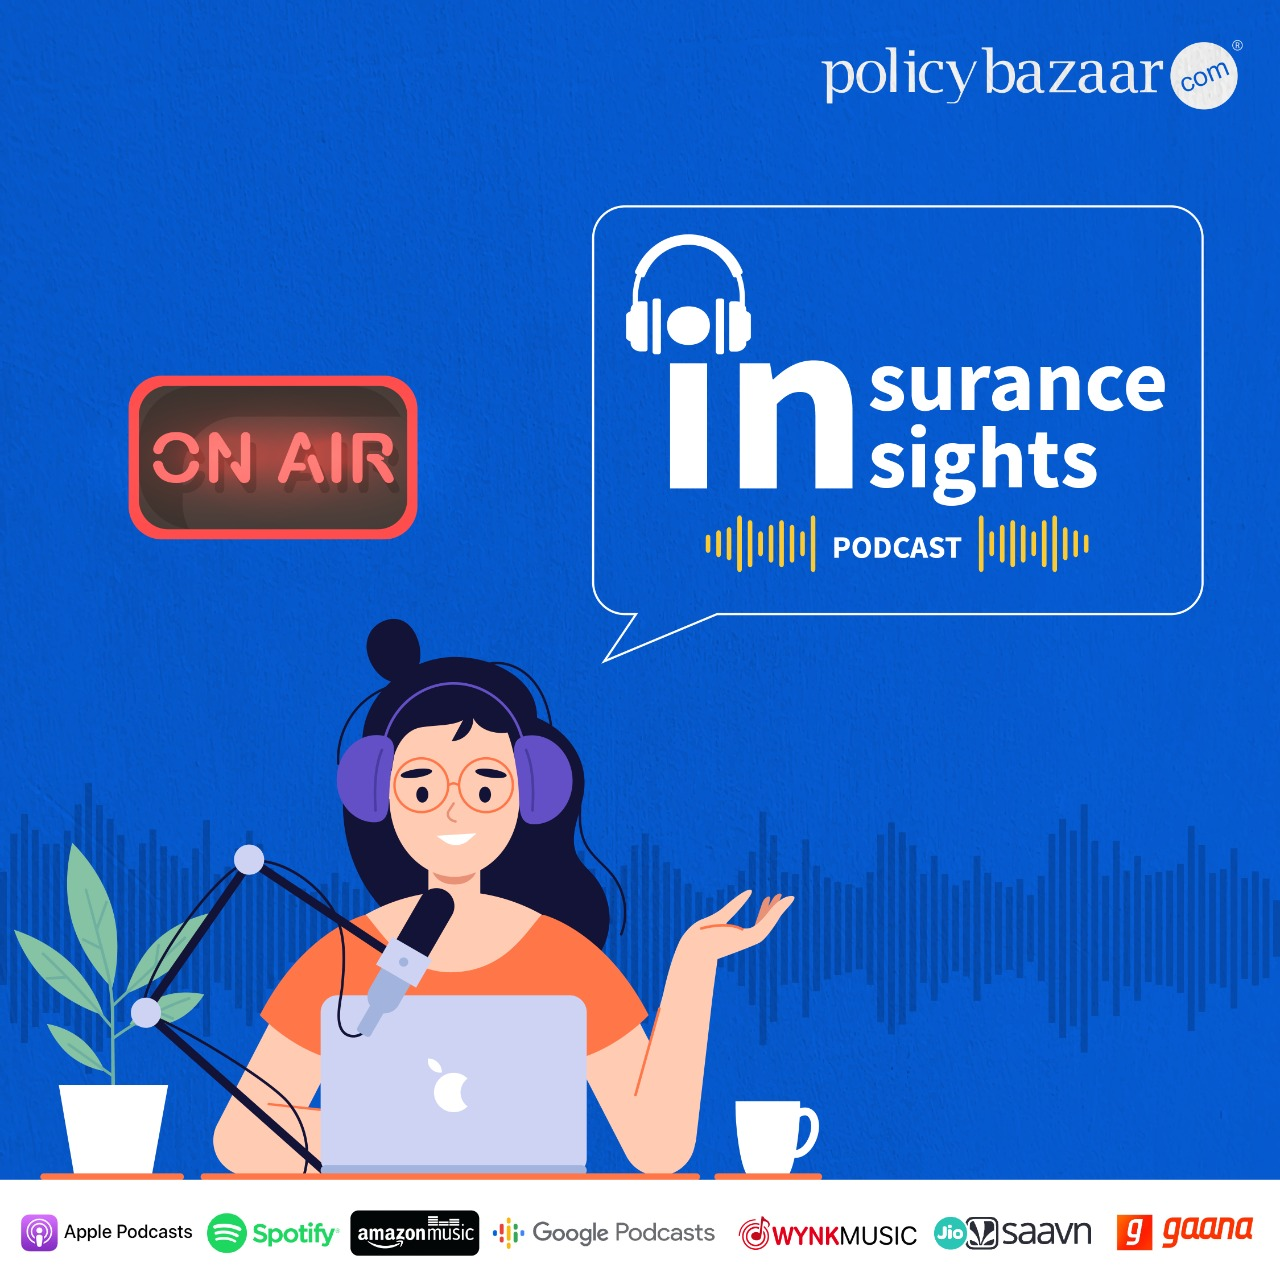 Listen up: The only insurance solution you need is finally here